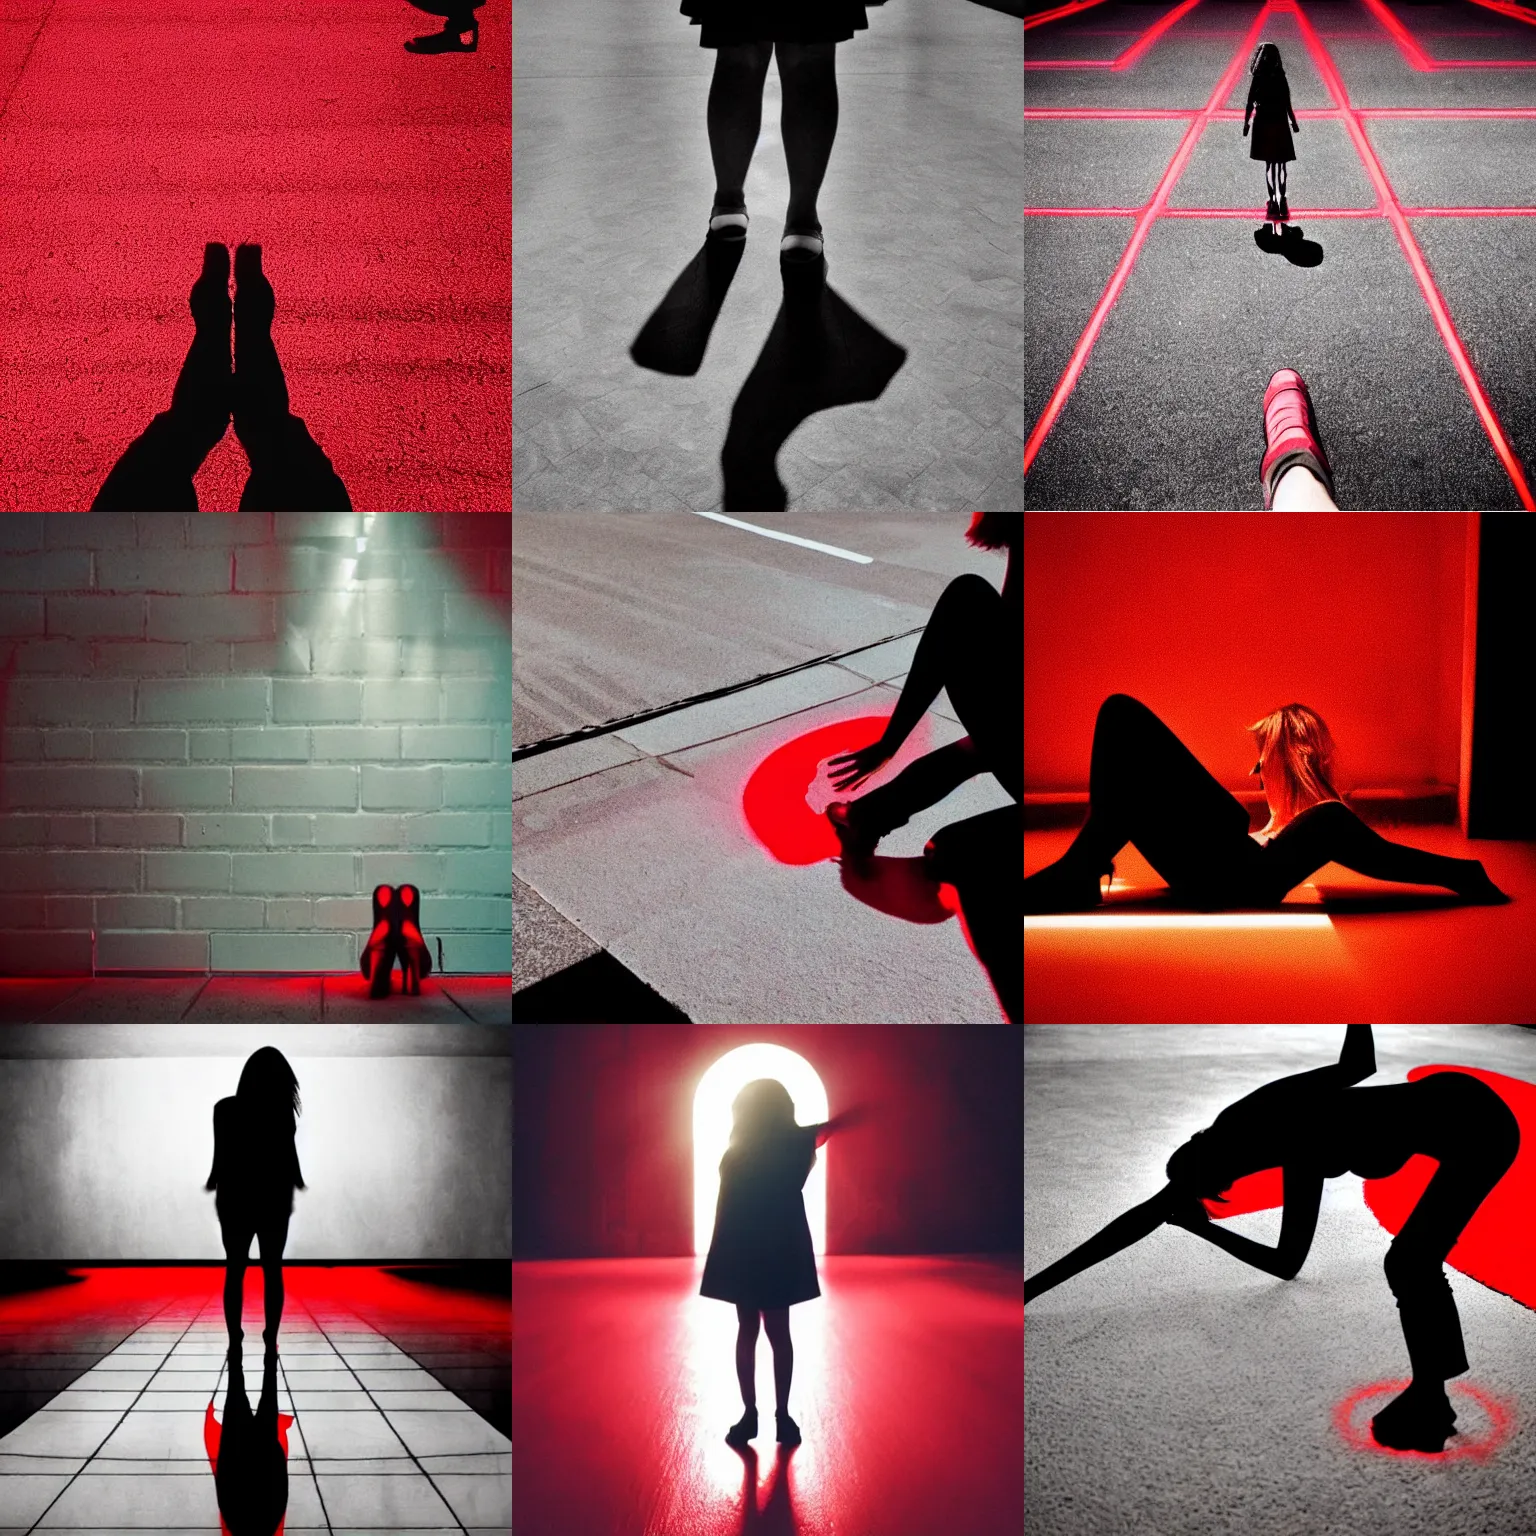 Prompt: she sees her own shadow cast in red light and outlined on the floor below her, what she sees is perfect and beautiful